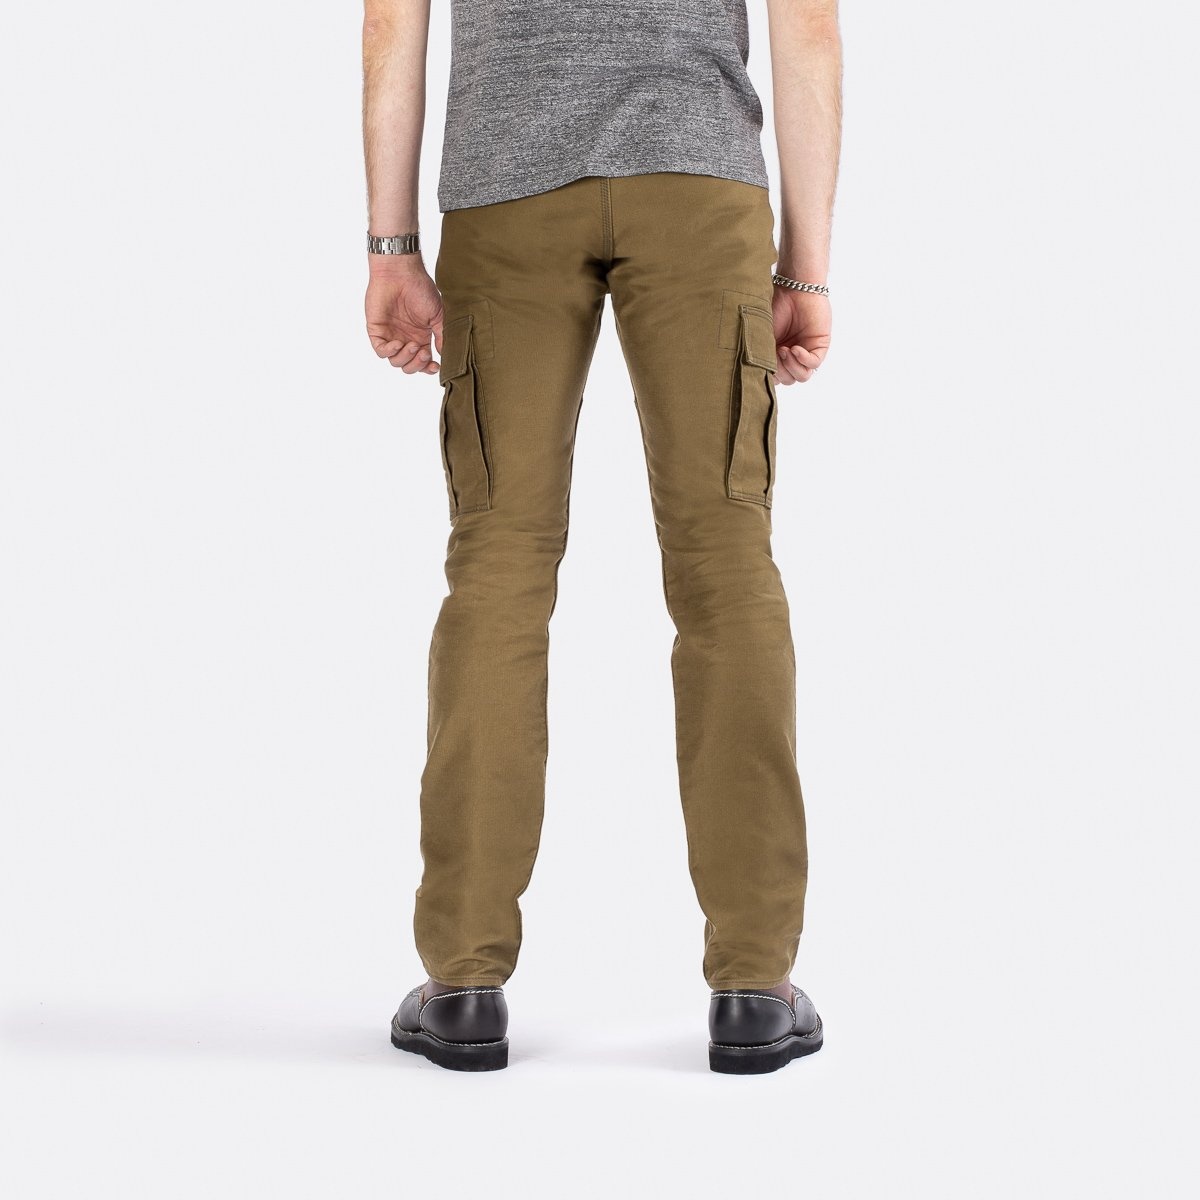 IHDR-502-OLV 11oz Cotton Whipcord Cargo Pants - Olive - 3